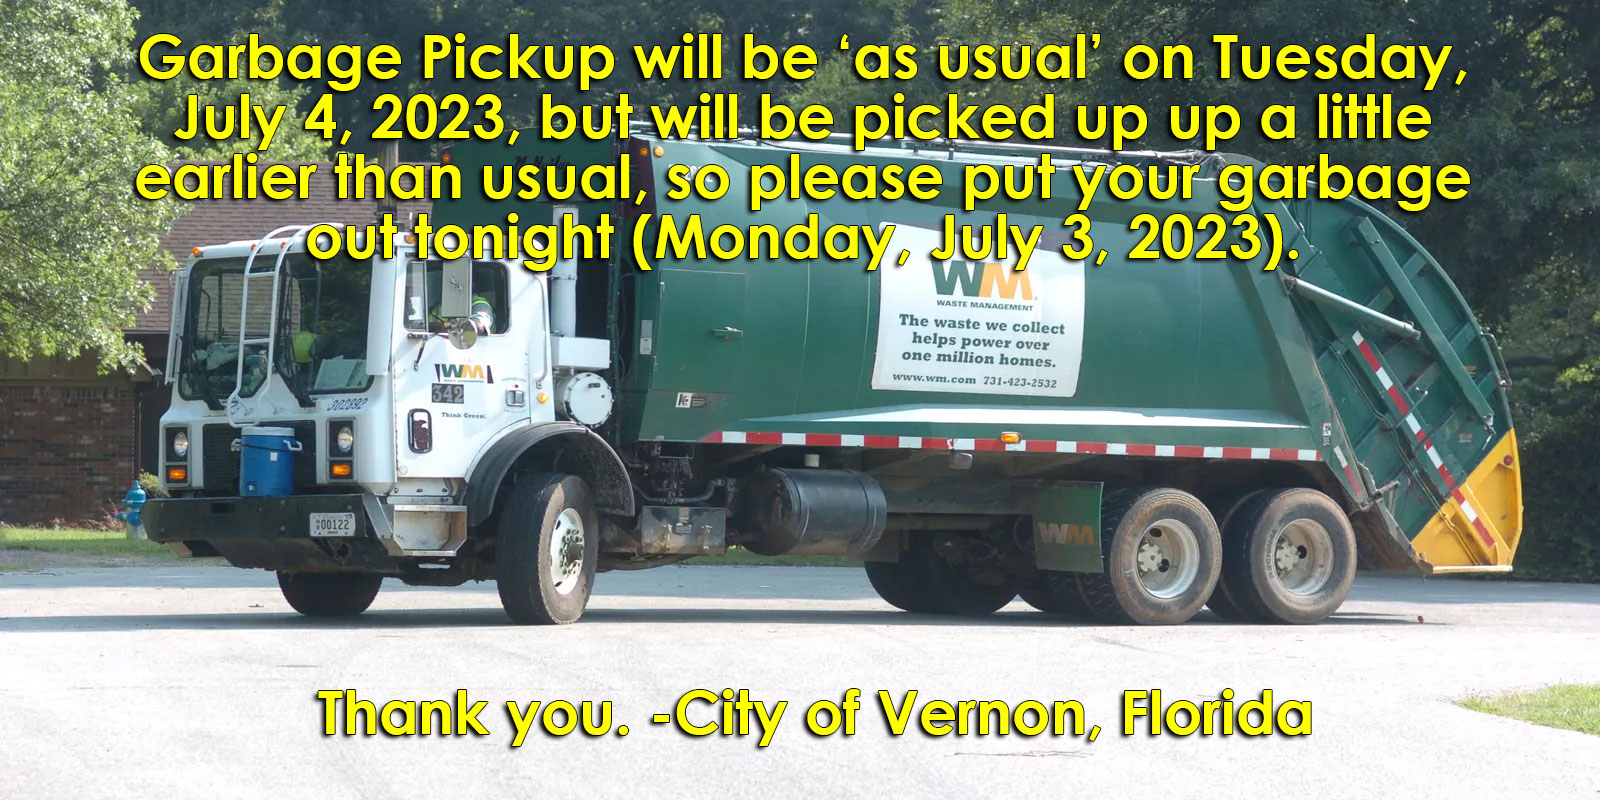 Vernon, Florida Garbage Pickup by Waste Management to be Earlier Than